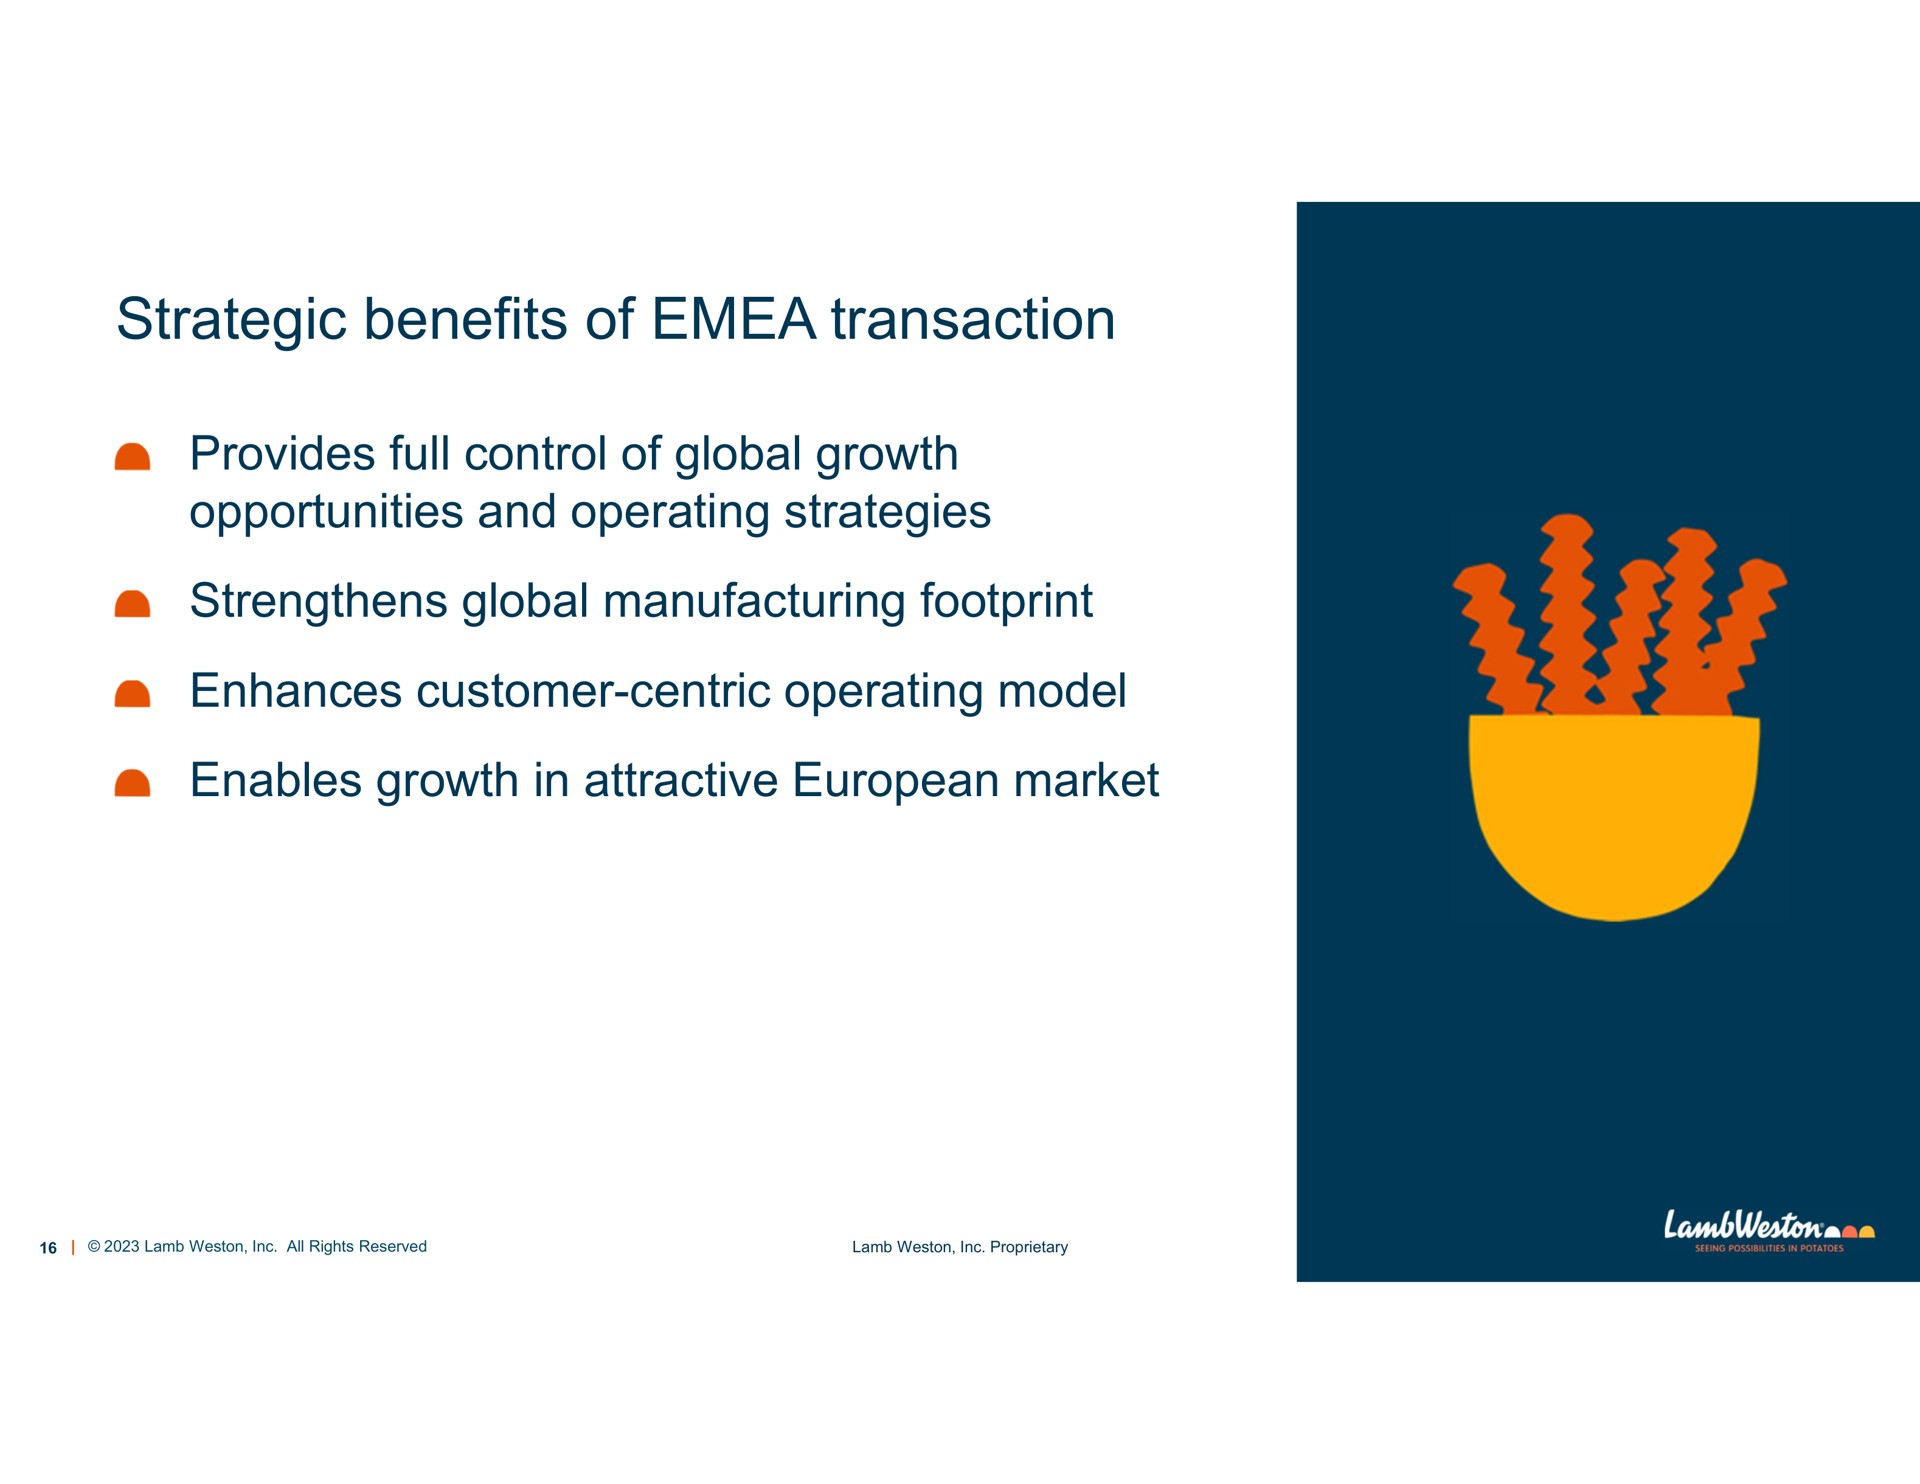 strategic benefits of transaction provides full control of global growth opportunities and operating strategies strengthens global manufacturing footprint enhances customer centric operating model enables growth in attractive market | Lamb Weston